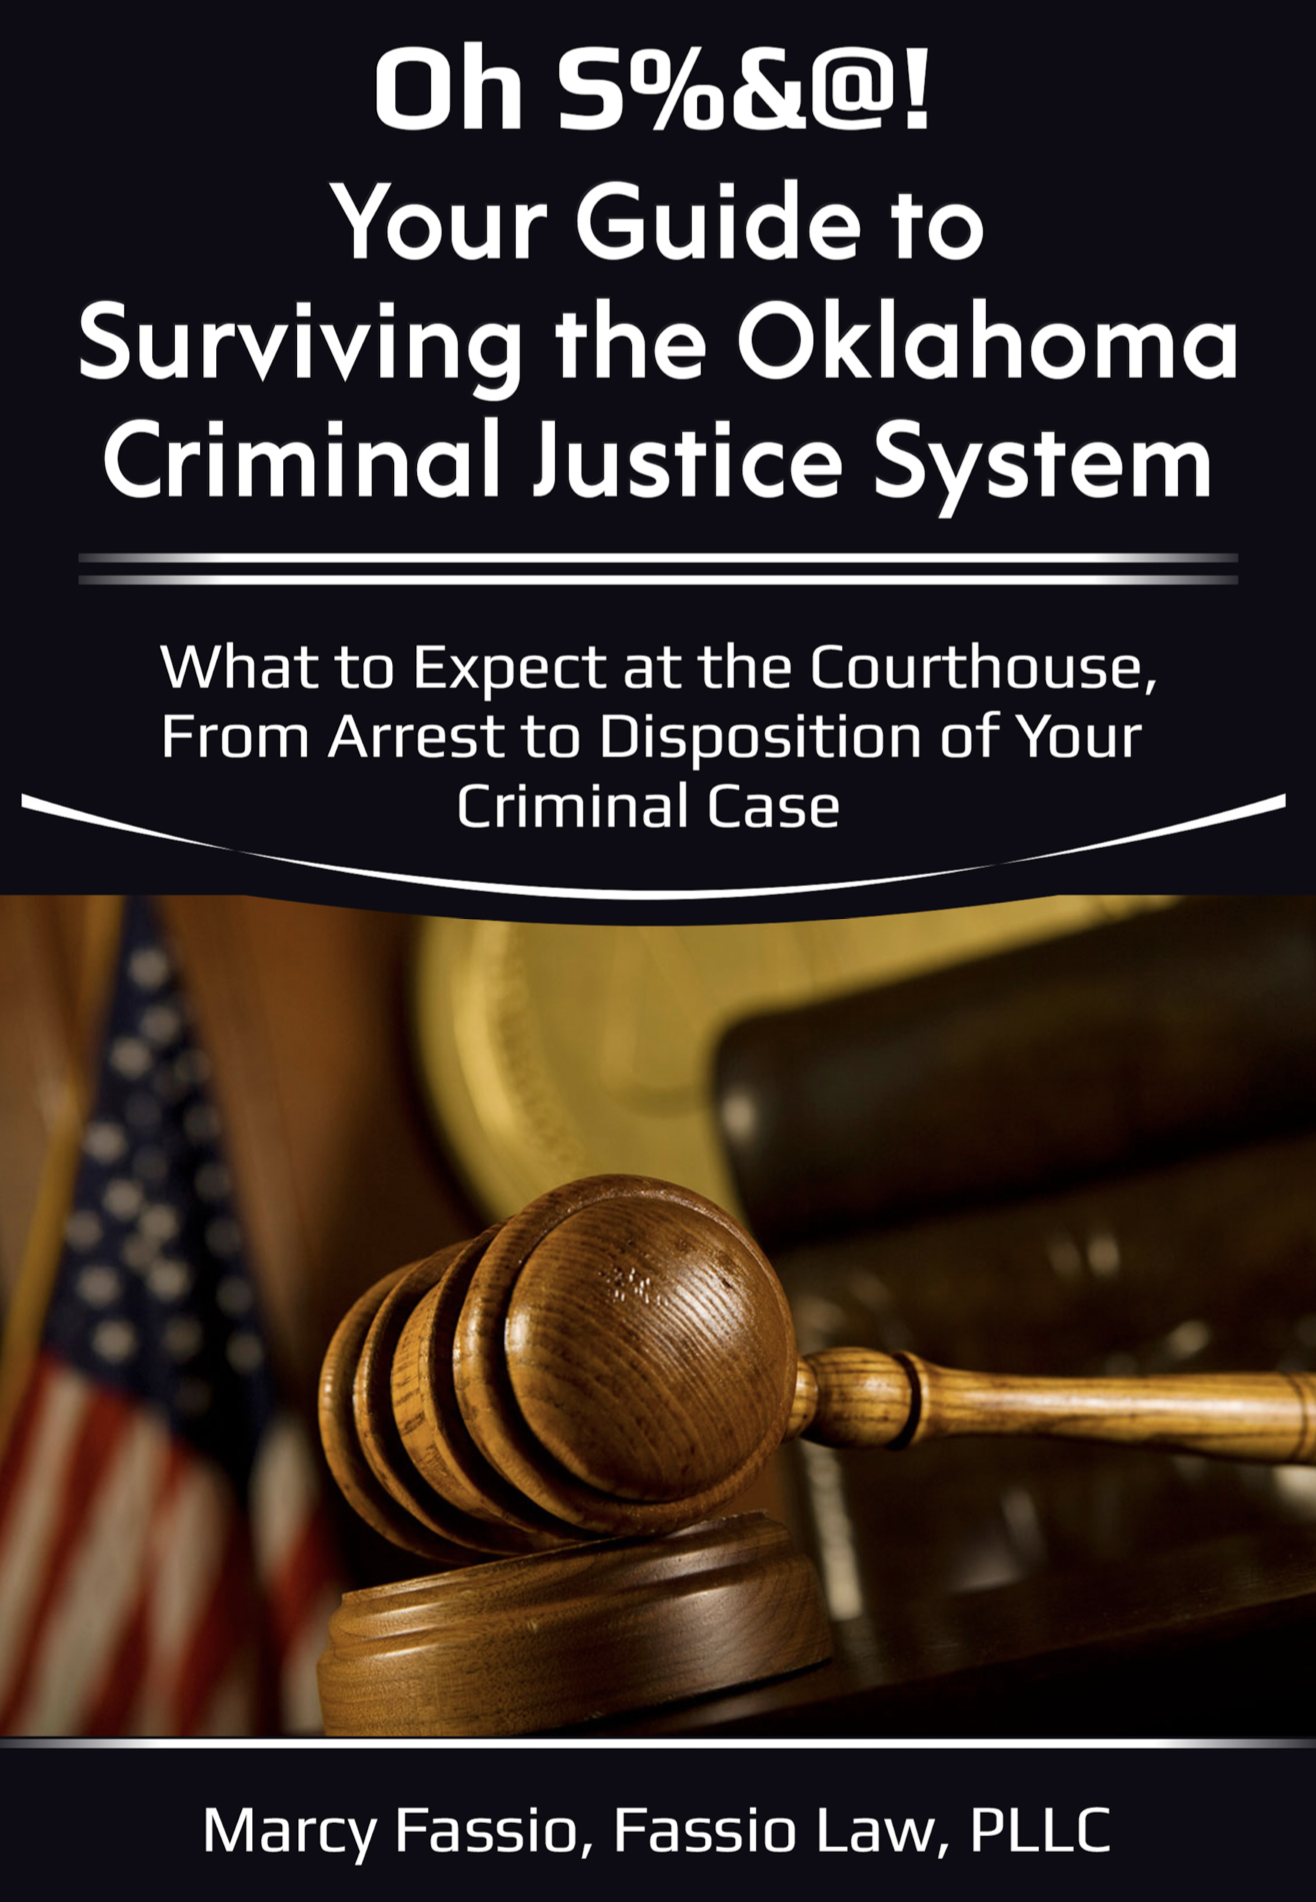 Your Guide To Surviving OK Criminal Justice System